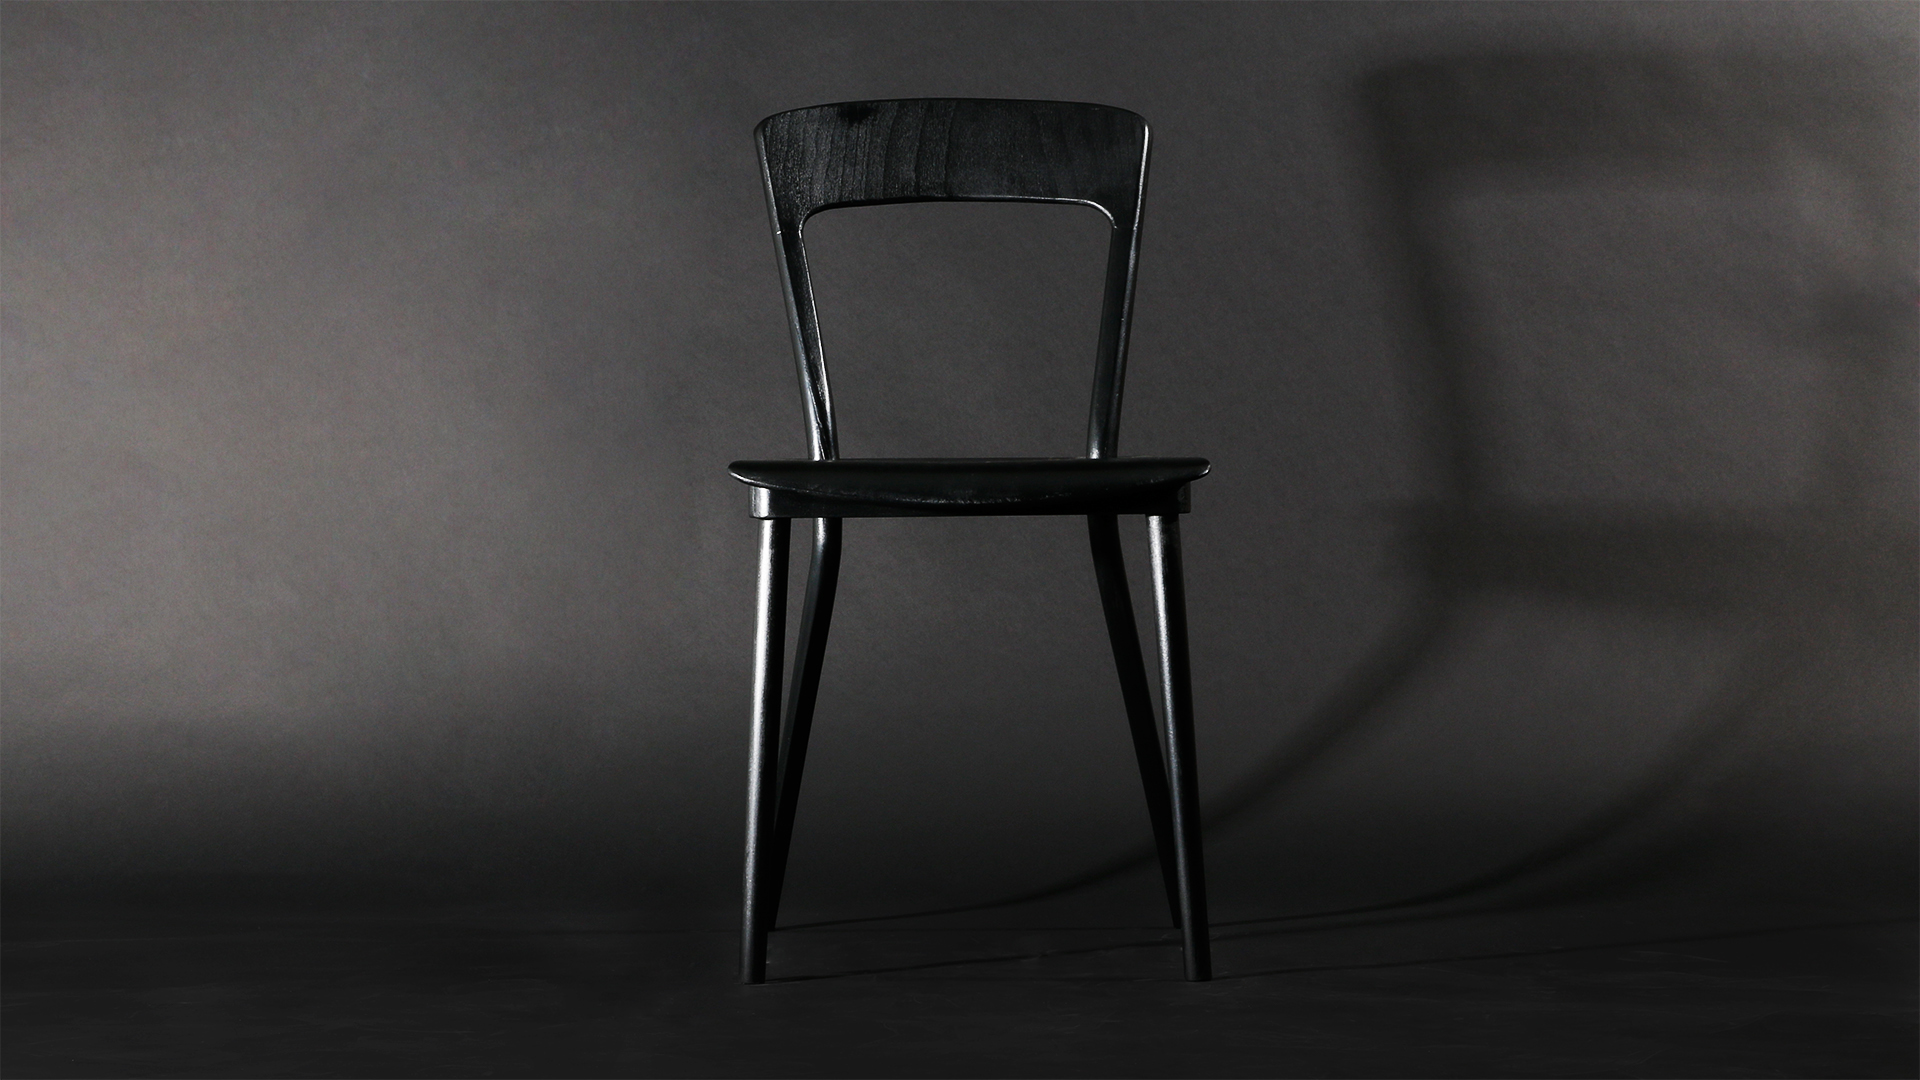 The Companion Chair by Constantin Werner